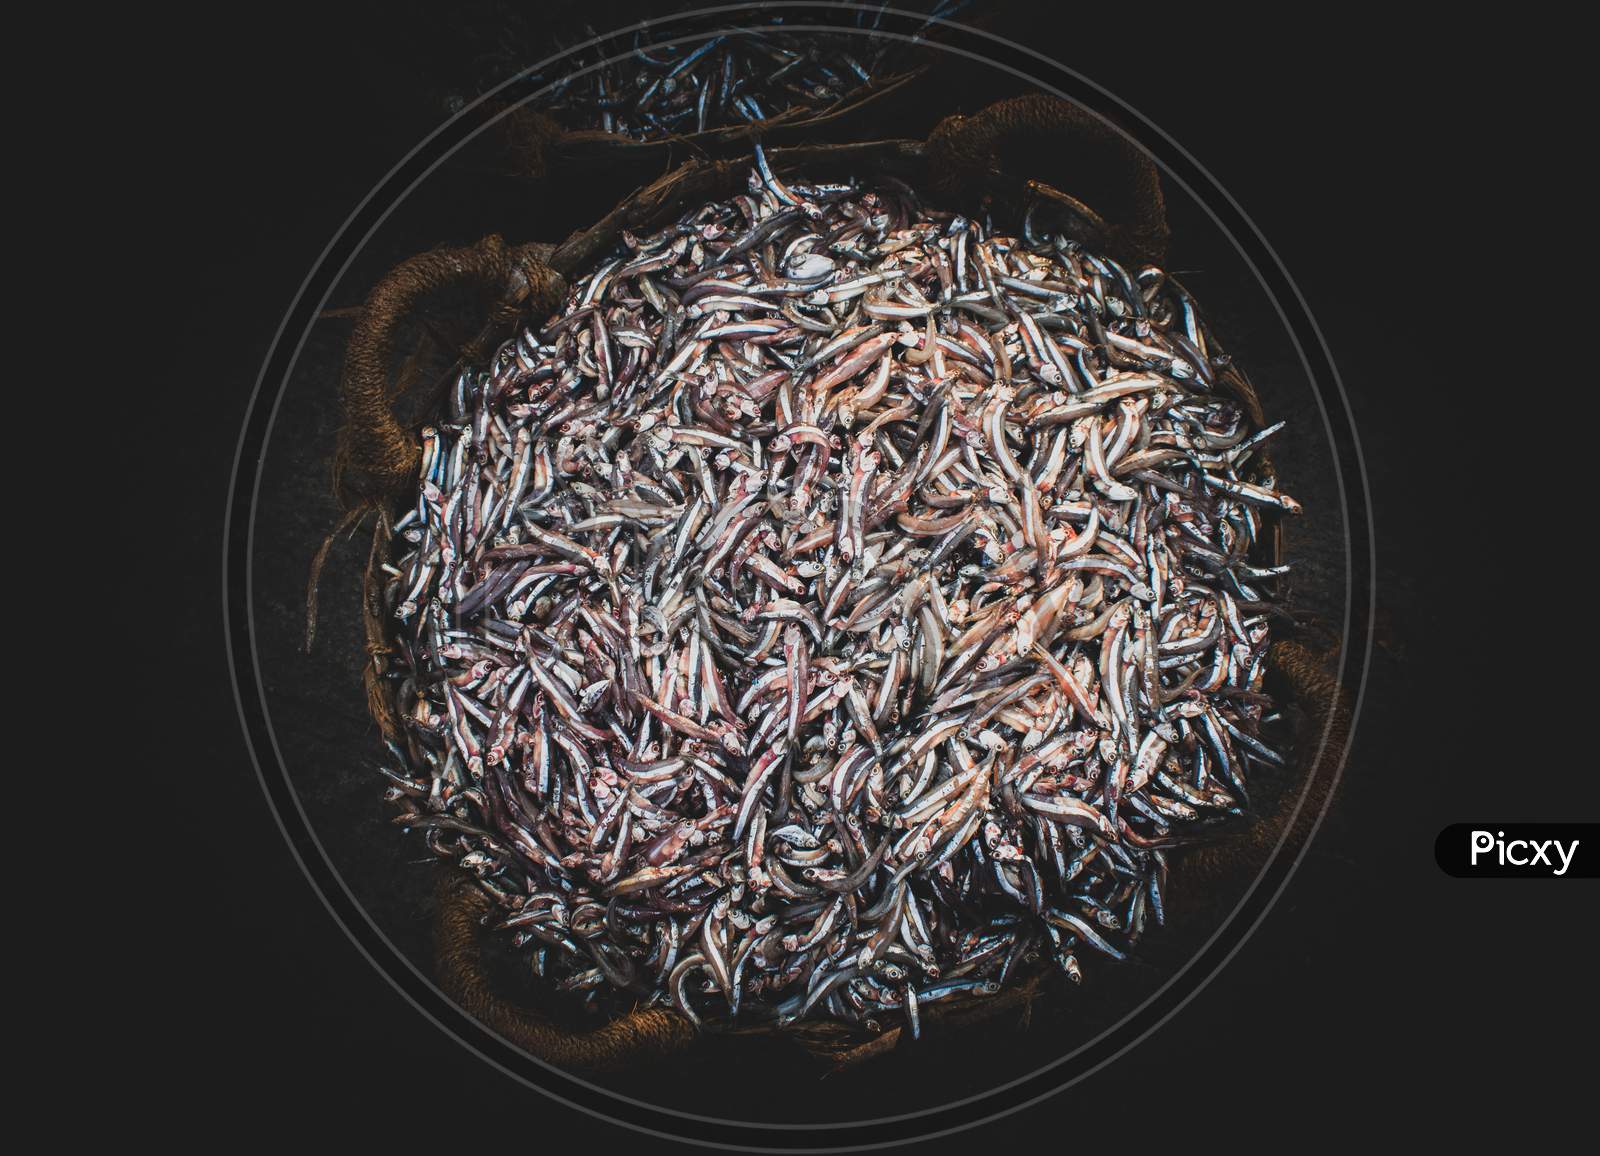 Collection Of Anchoviella Lepidentostole Fish In The Basket For Sale.